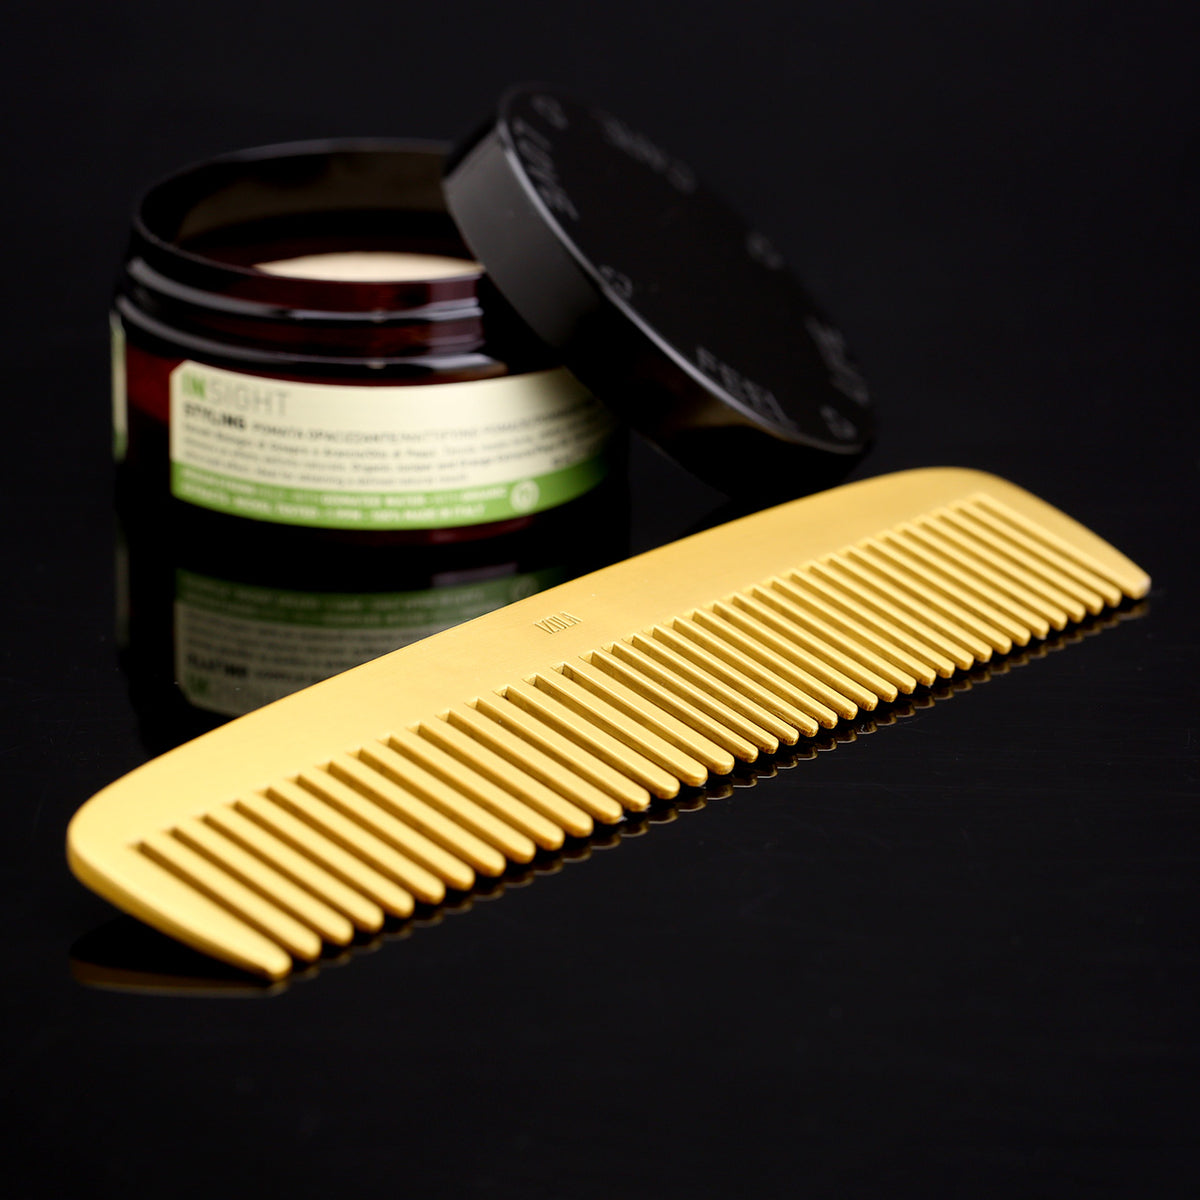 Brass comb on reflective black surface with an open tub of hair pomade for size reference. Pomade sold separately